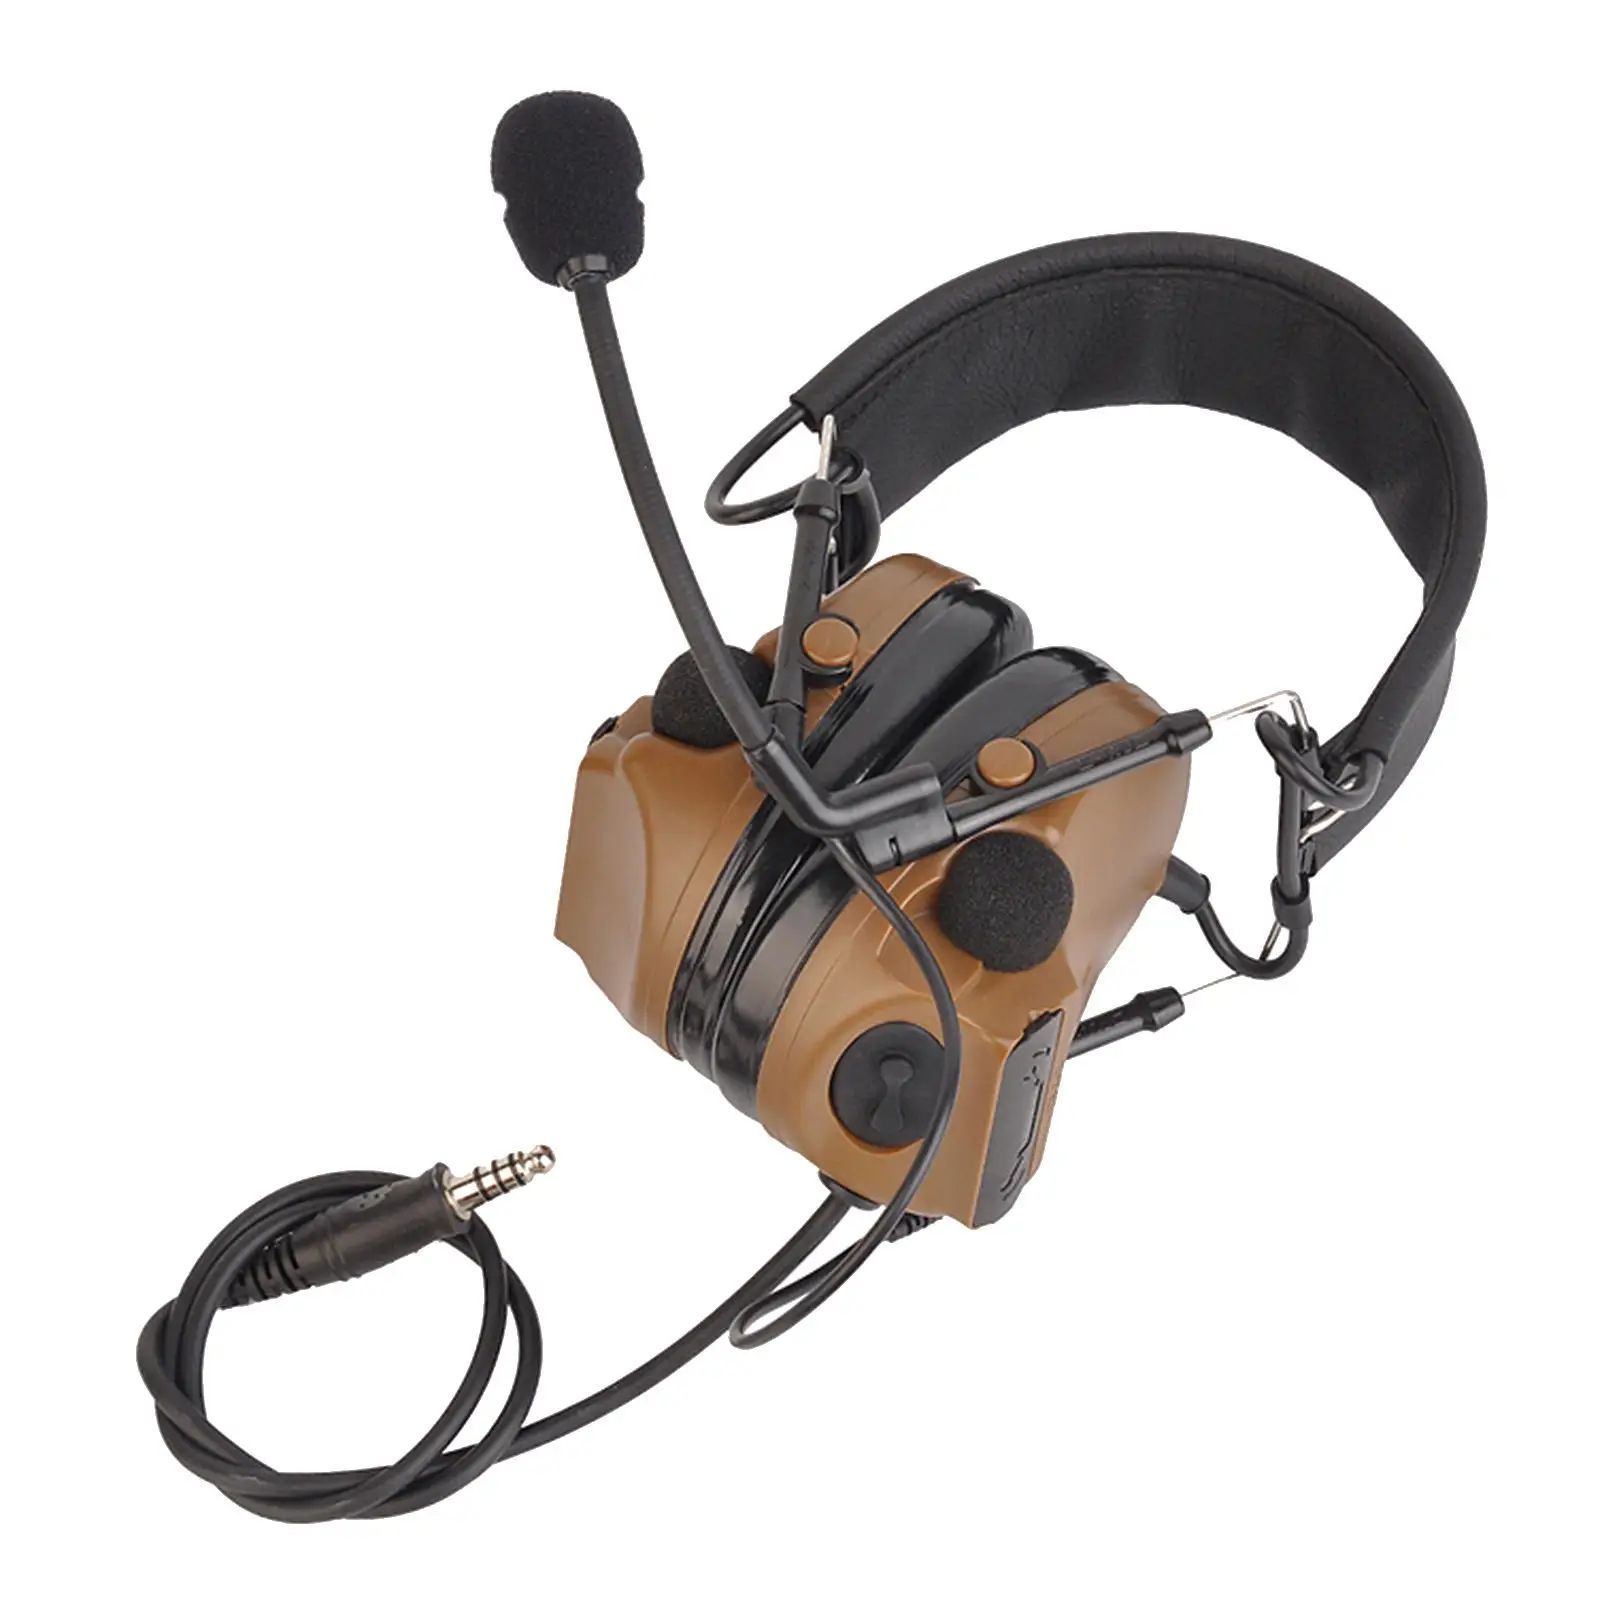 Tactical Headset Wargame Hunting Headphone for Military Radio Walkie Talkie with Noise Cancellation Function